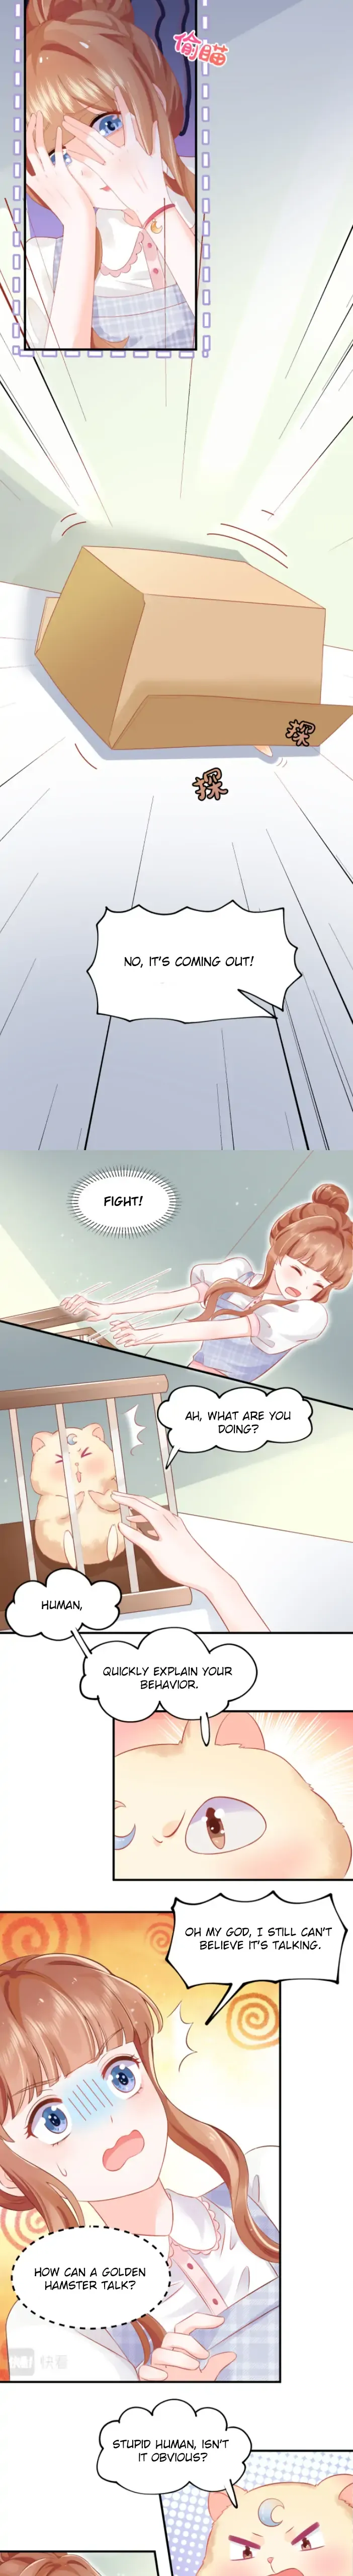 Golden Hamster’s Love Collection chapter 1 - Page 7